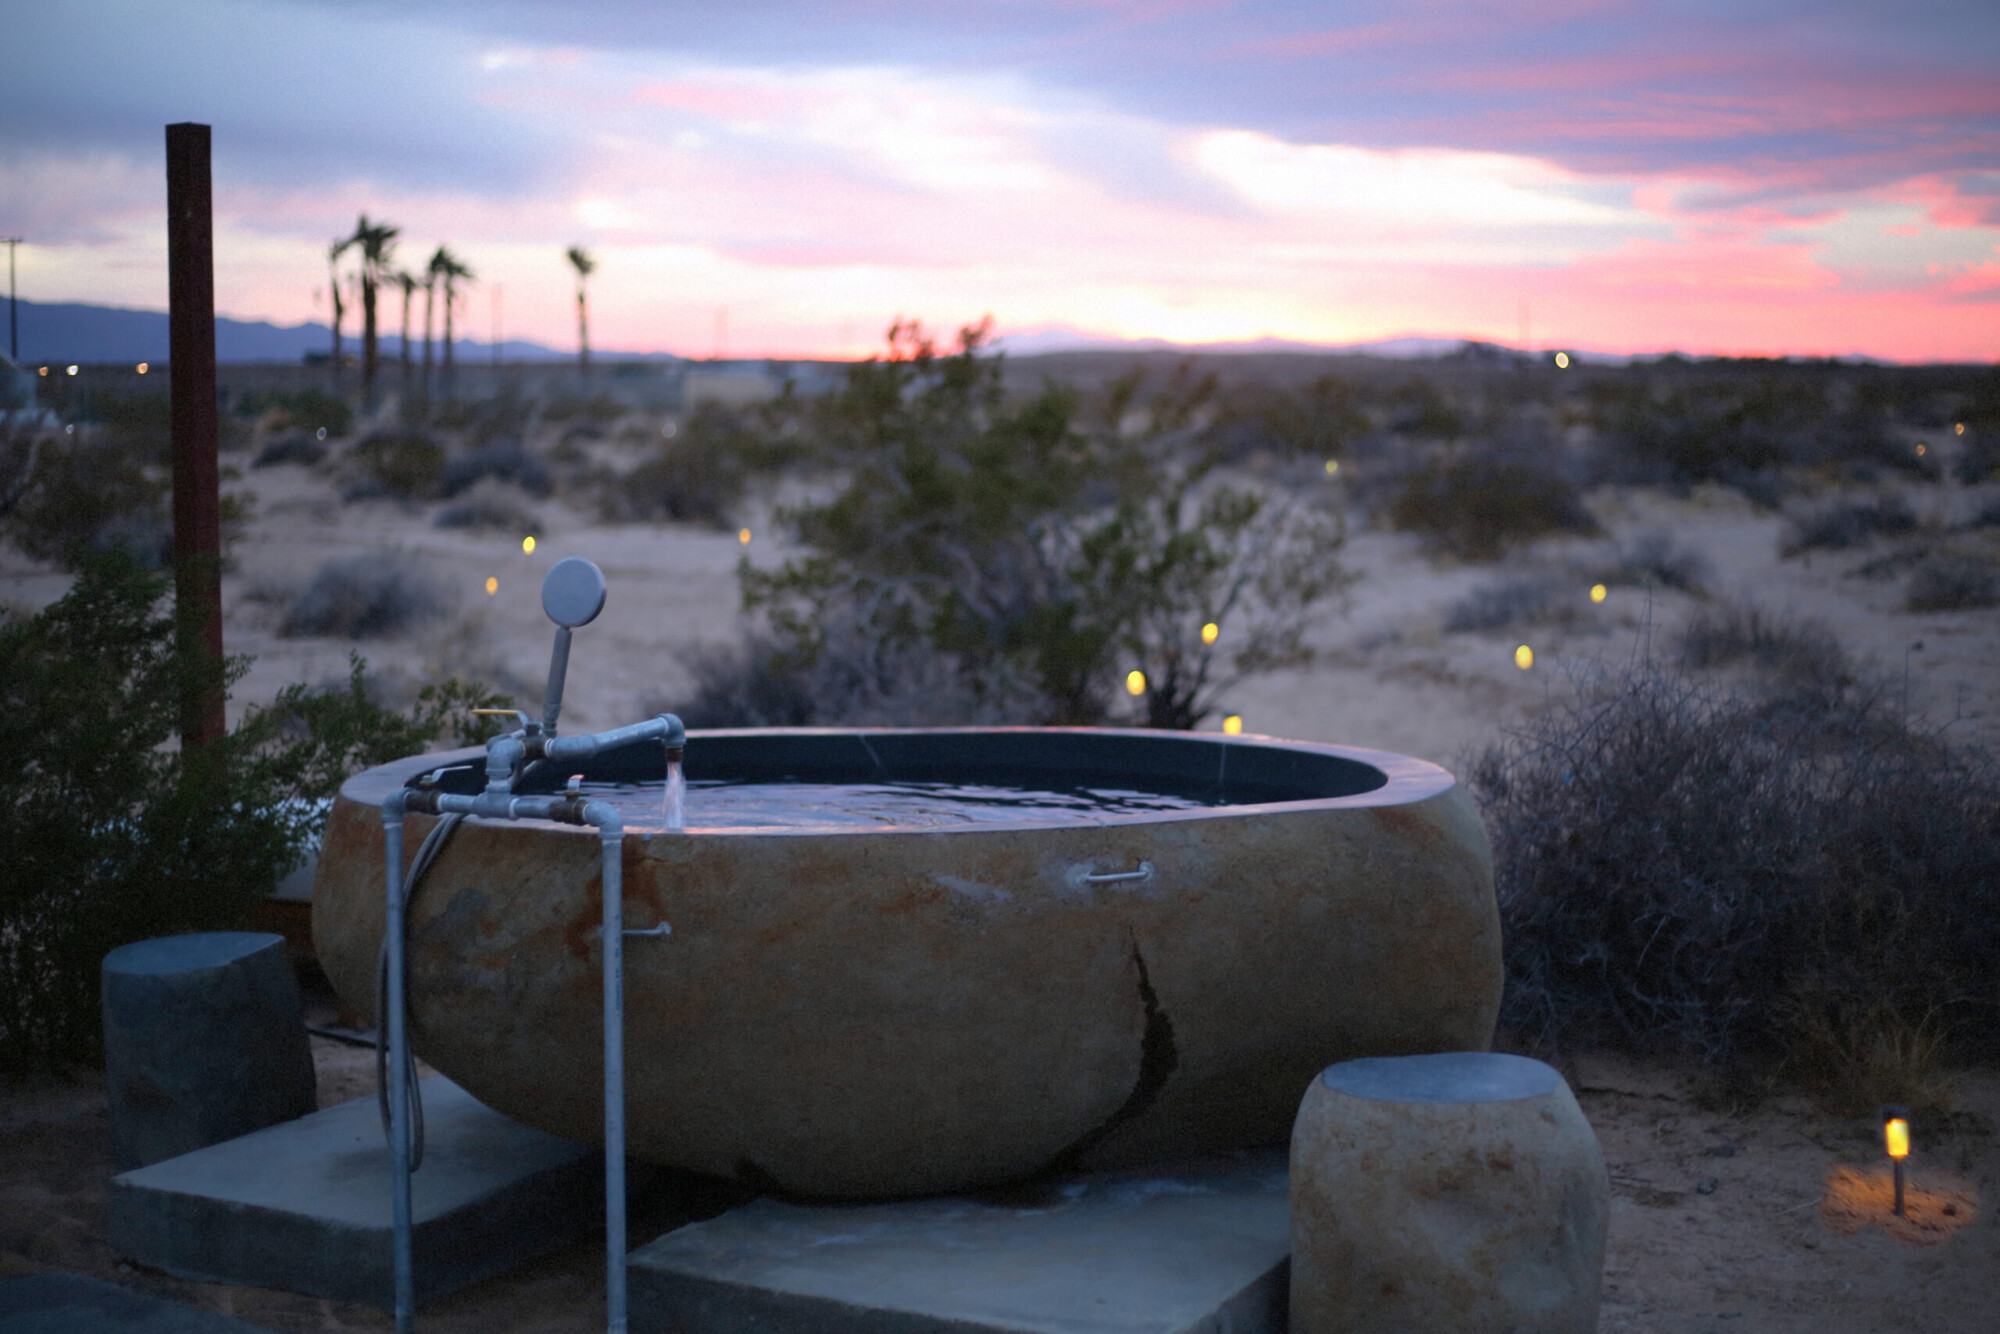 Sunset view of a hot springs tub at Ocotillo Oasis near Wonder Valley, California.